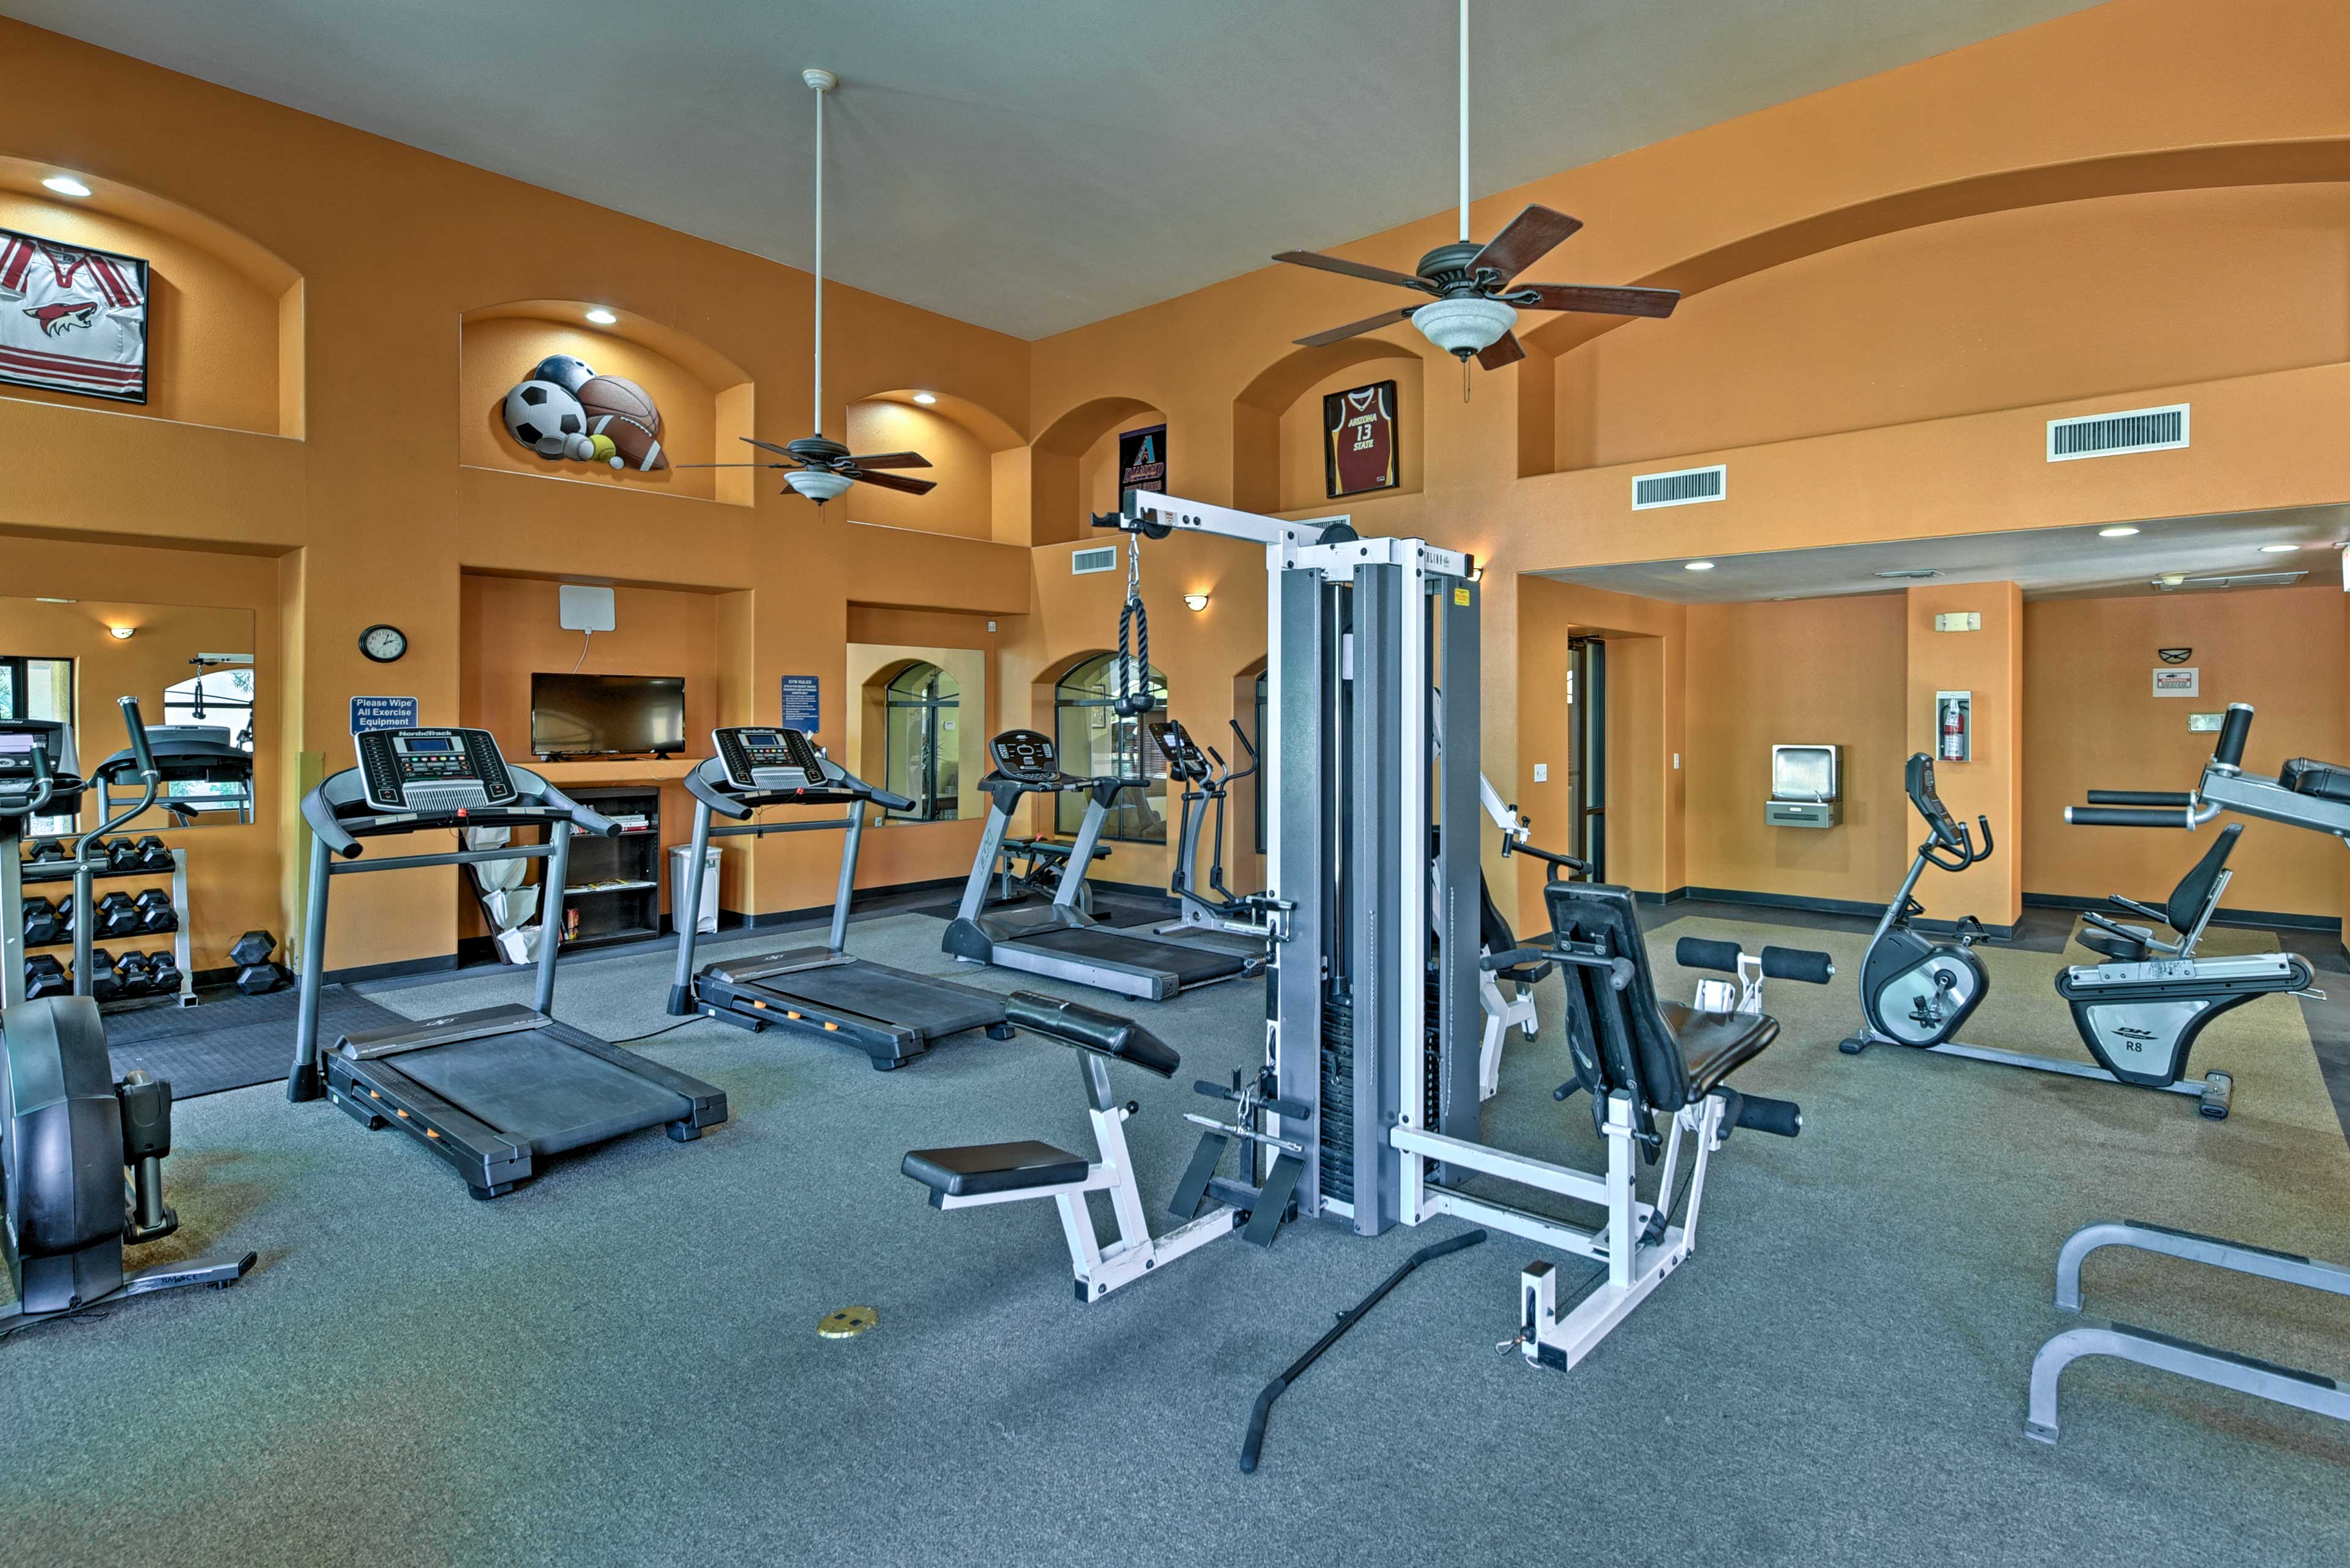 Get a workout in at the community fitness center.